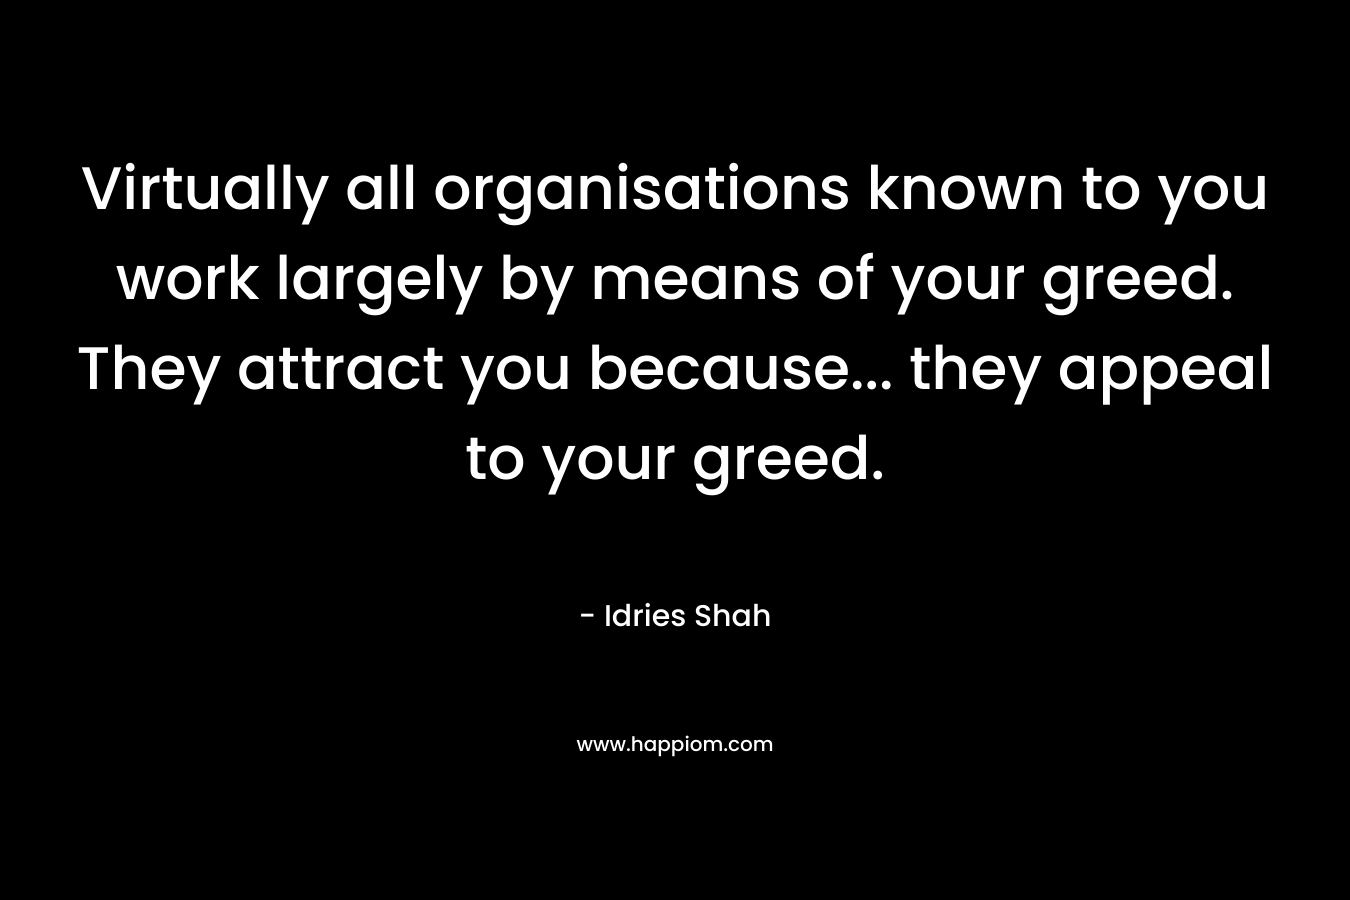 Virtually all organisations known to you work largely by means of your greed. They attract you because... they appeal to your greed.